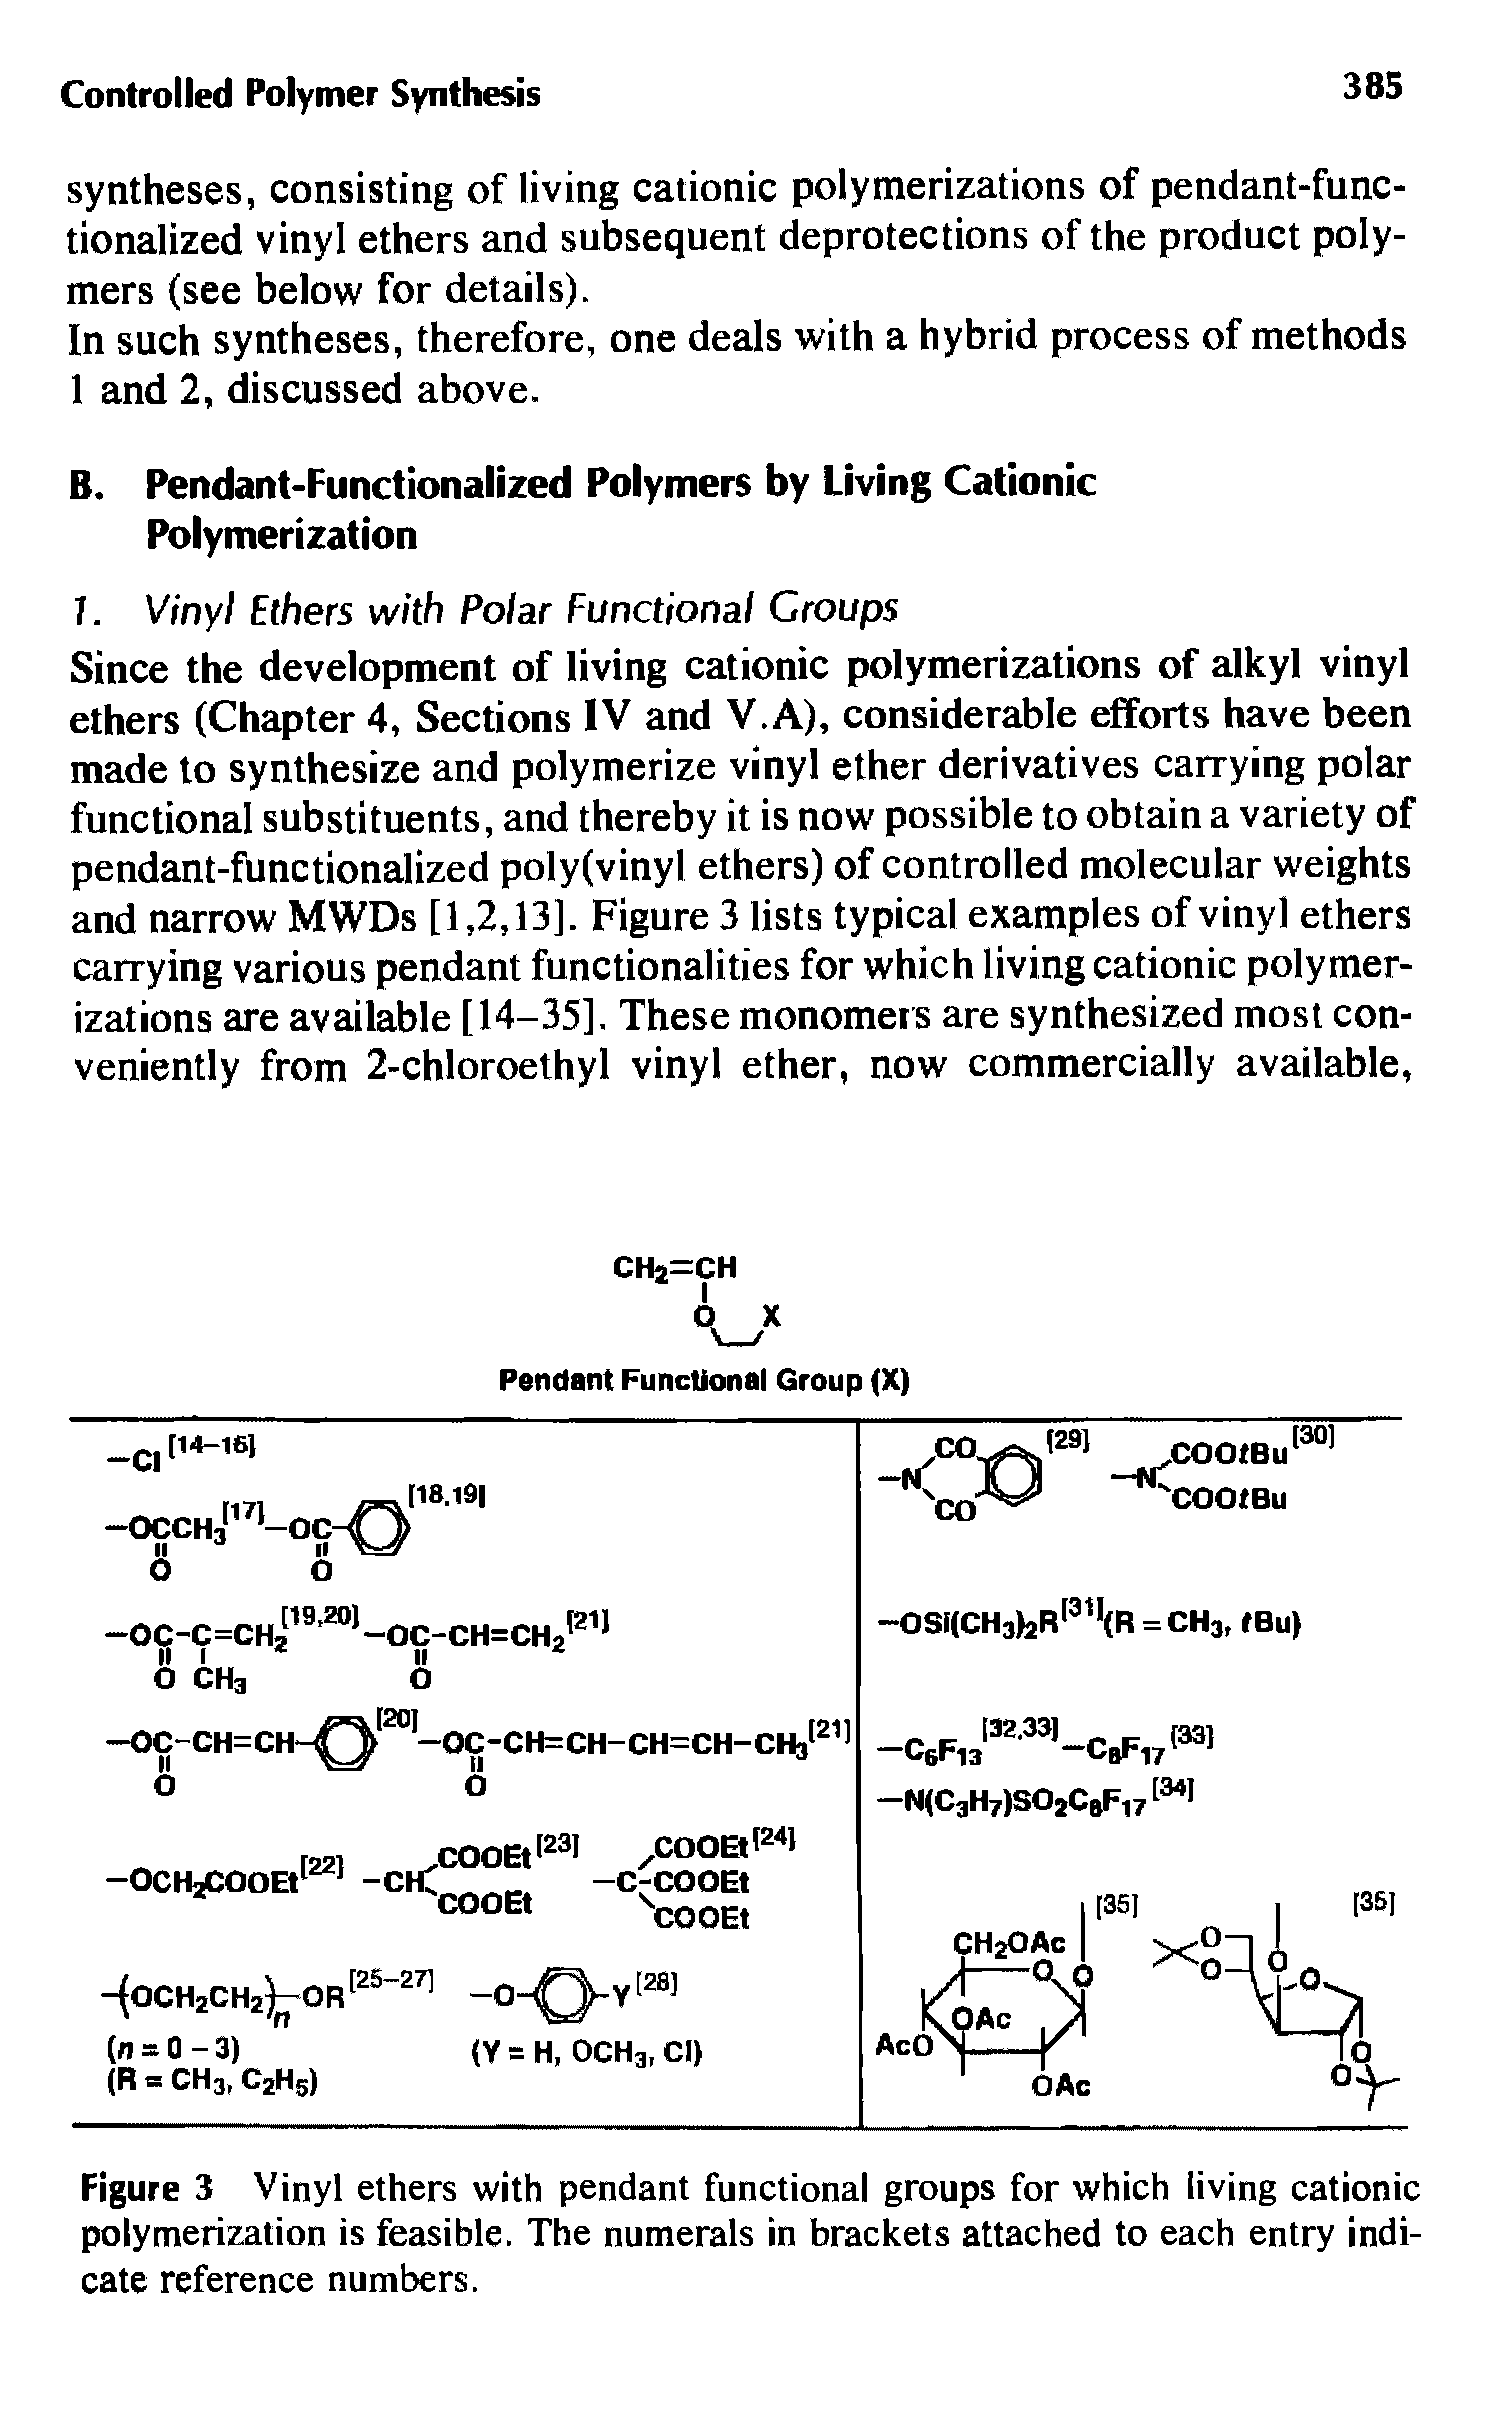 Figure 3 Vinyl ethers with pendant functional groups for which living cationic polymerization is feasible. The numerals in brackets attached to each entry indicate reference numbers.